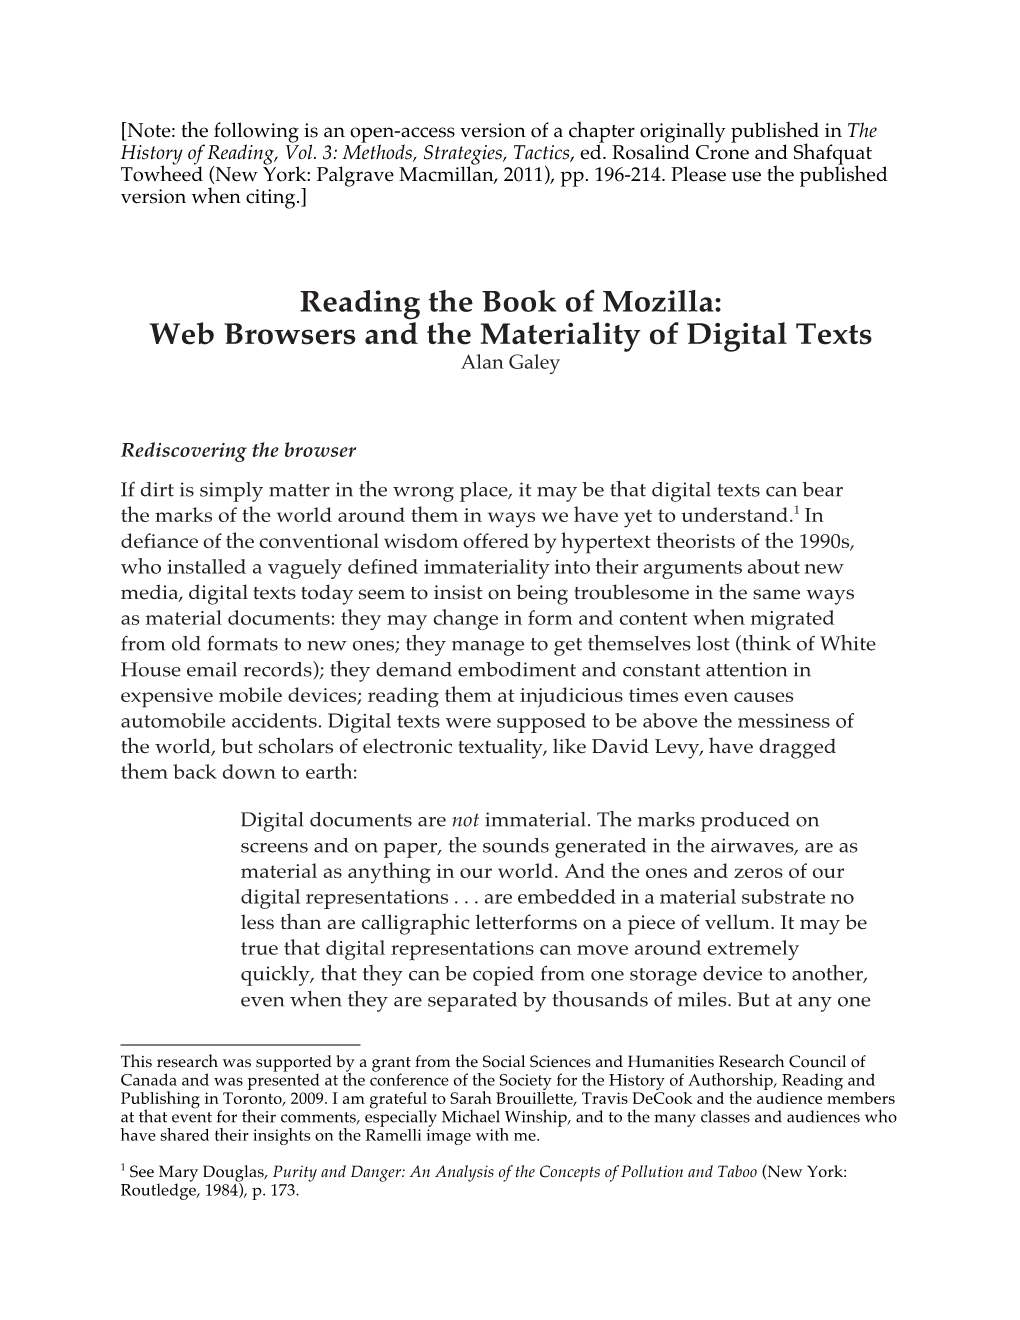 Reading the Book of Mozilla: Web Browsers and the Materiality of Digital Texts Alan Galey